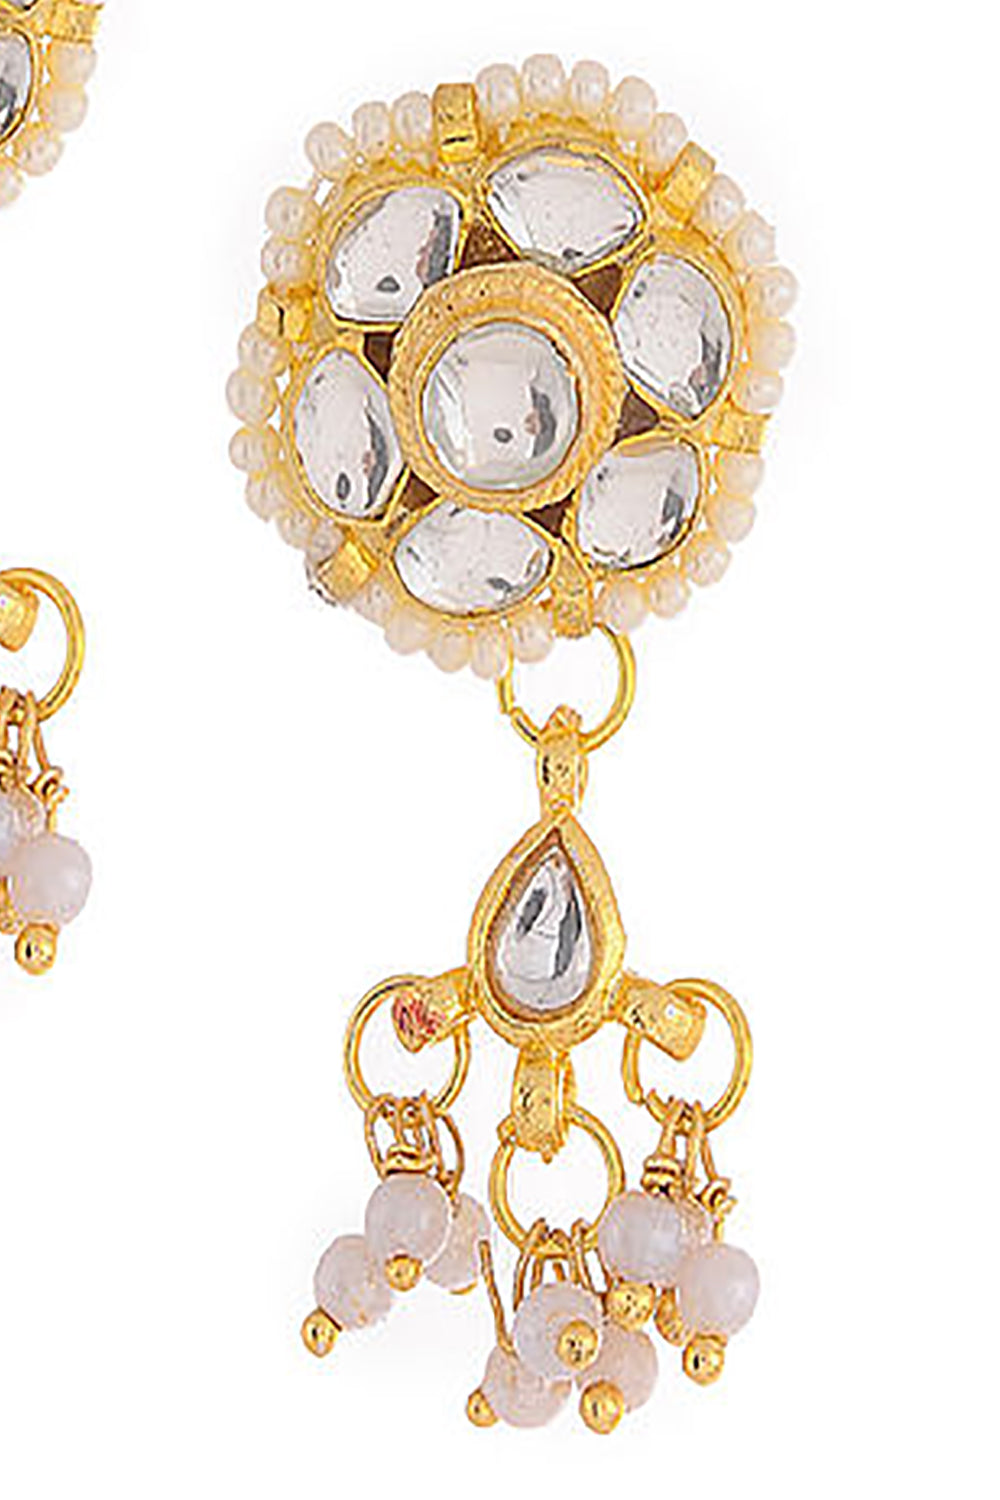 Alloy Kundan Studs Earring in Gold and White